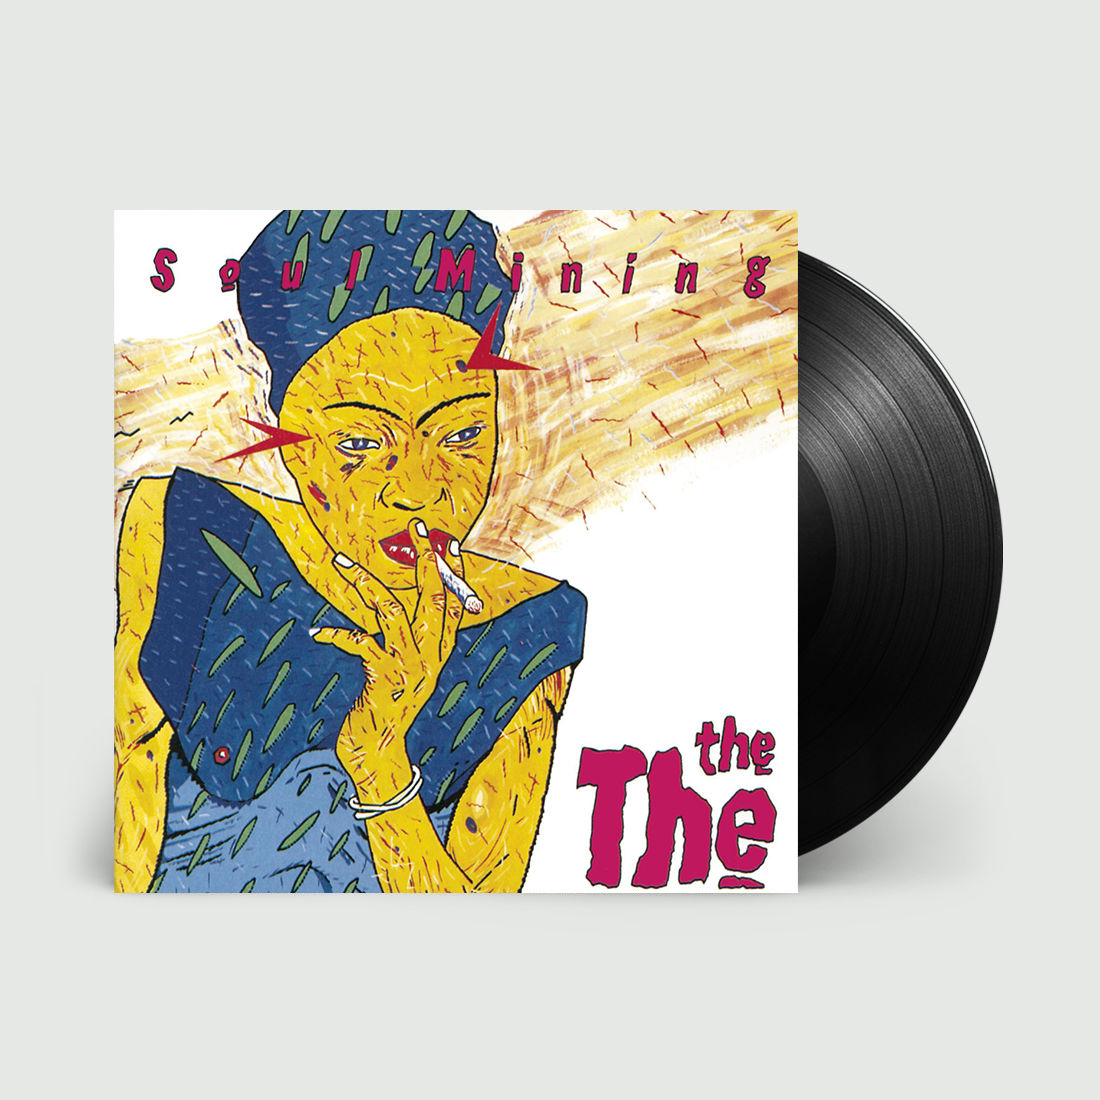 The The - Soul Mining: Limited Edition Vinyl LP [NAD22]